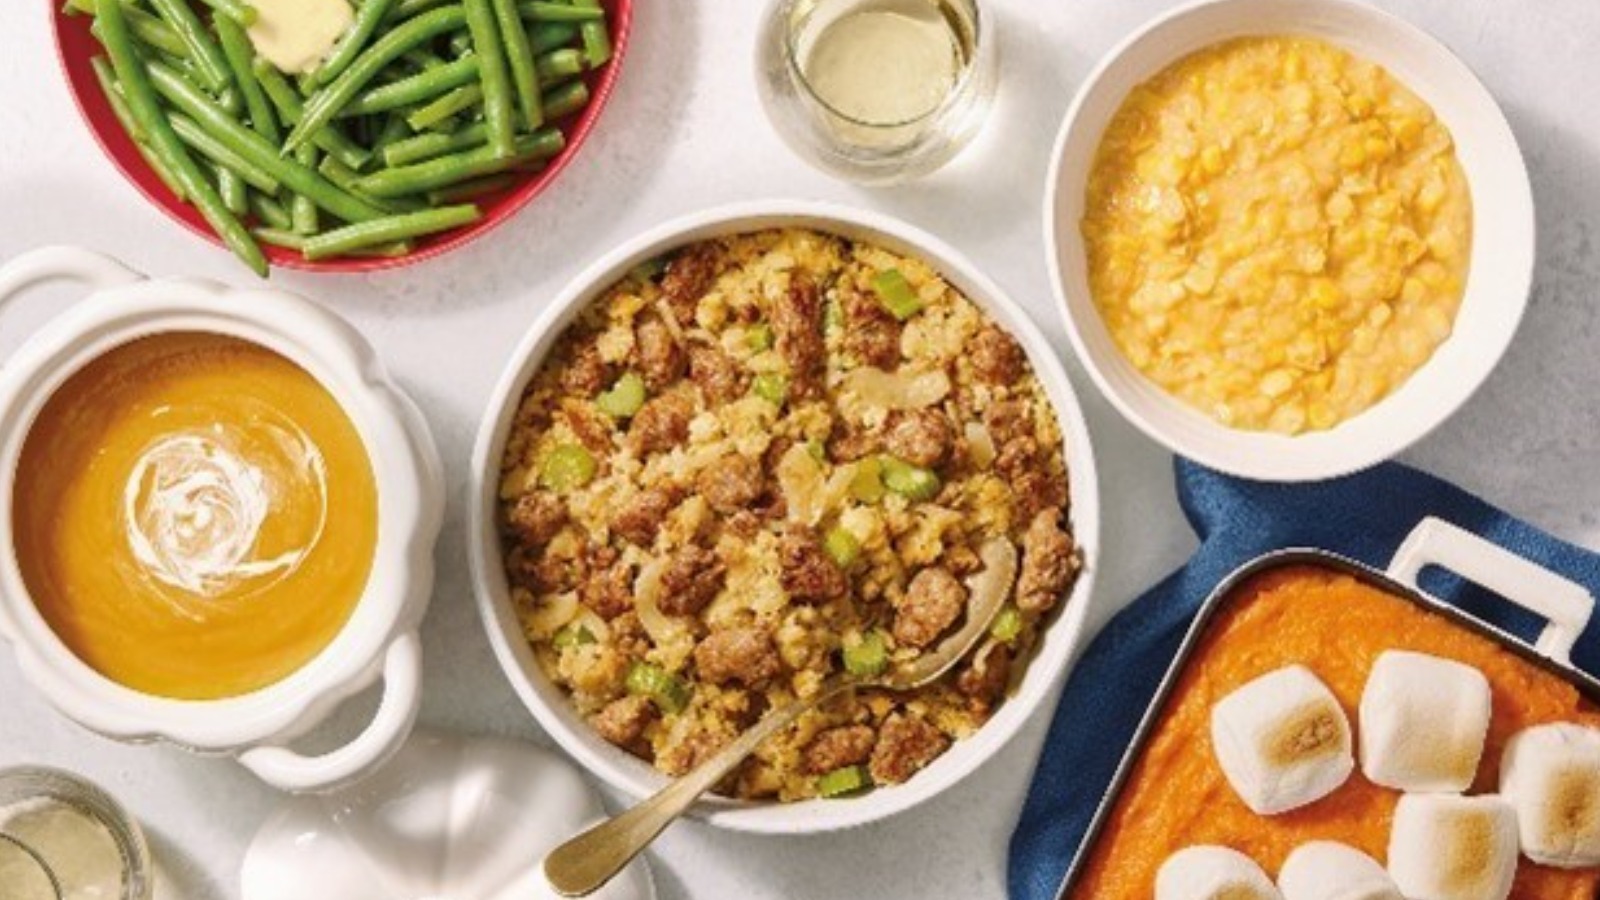 Aldi's Thanksgiving Price Rewind Is Taking Us Back To 2019